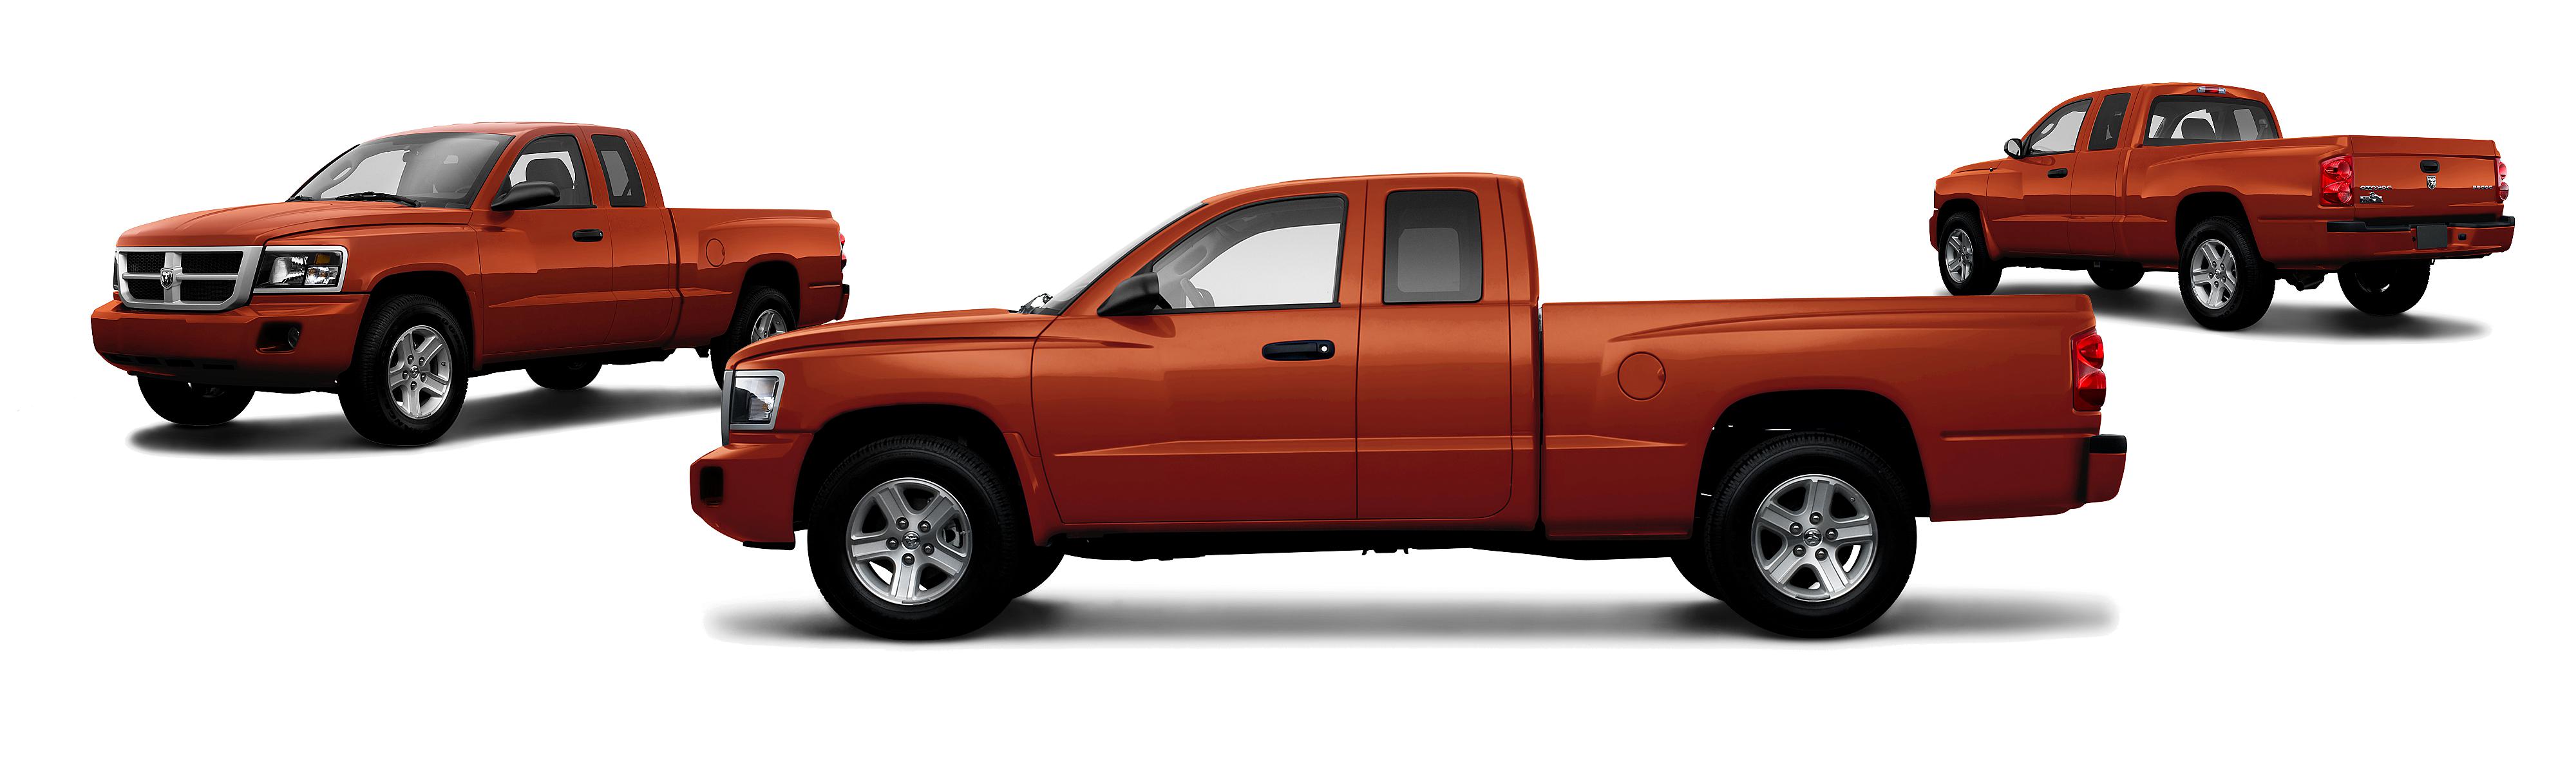 2009 Dodge Dakota 4x2 BigHorn Extended Cab 4dr - Research - GrooveCar